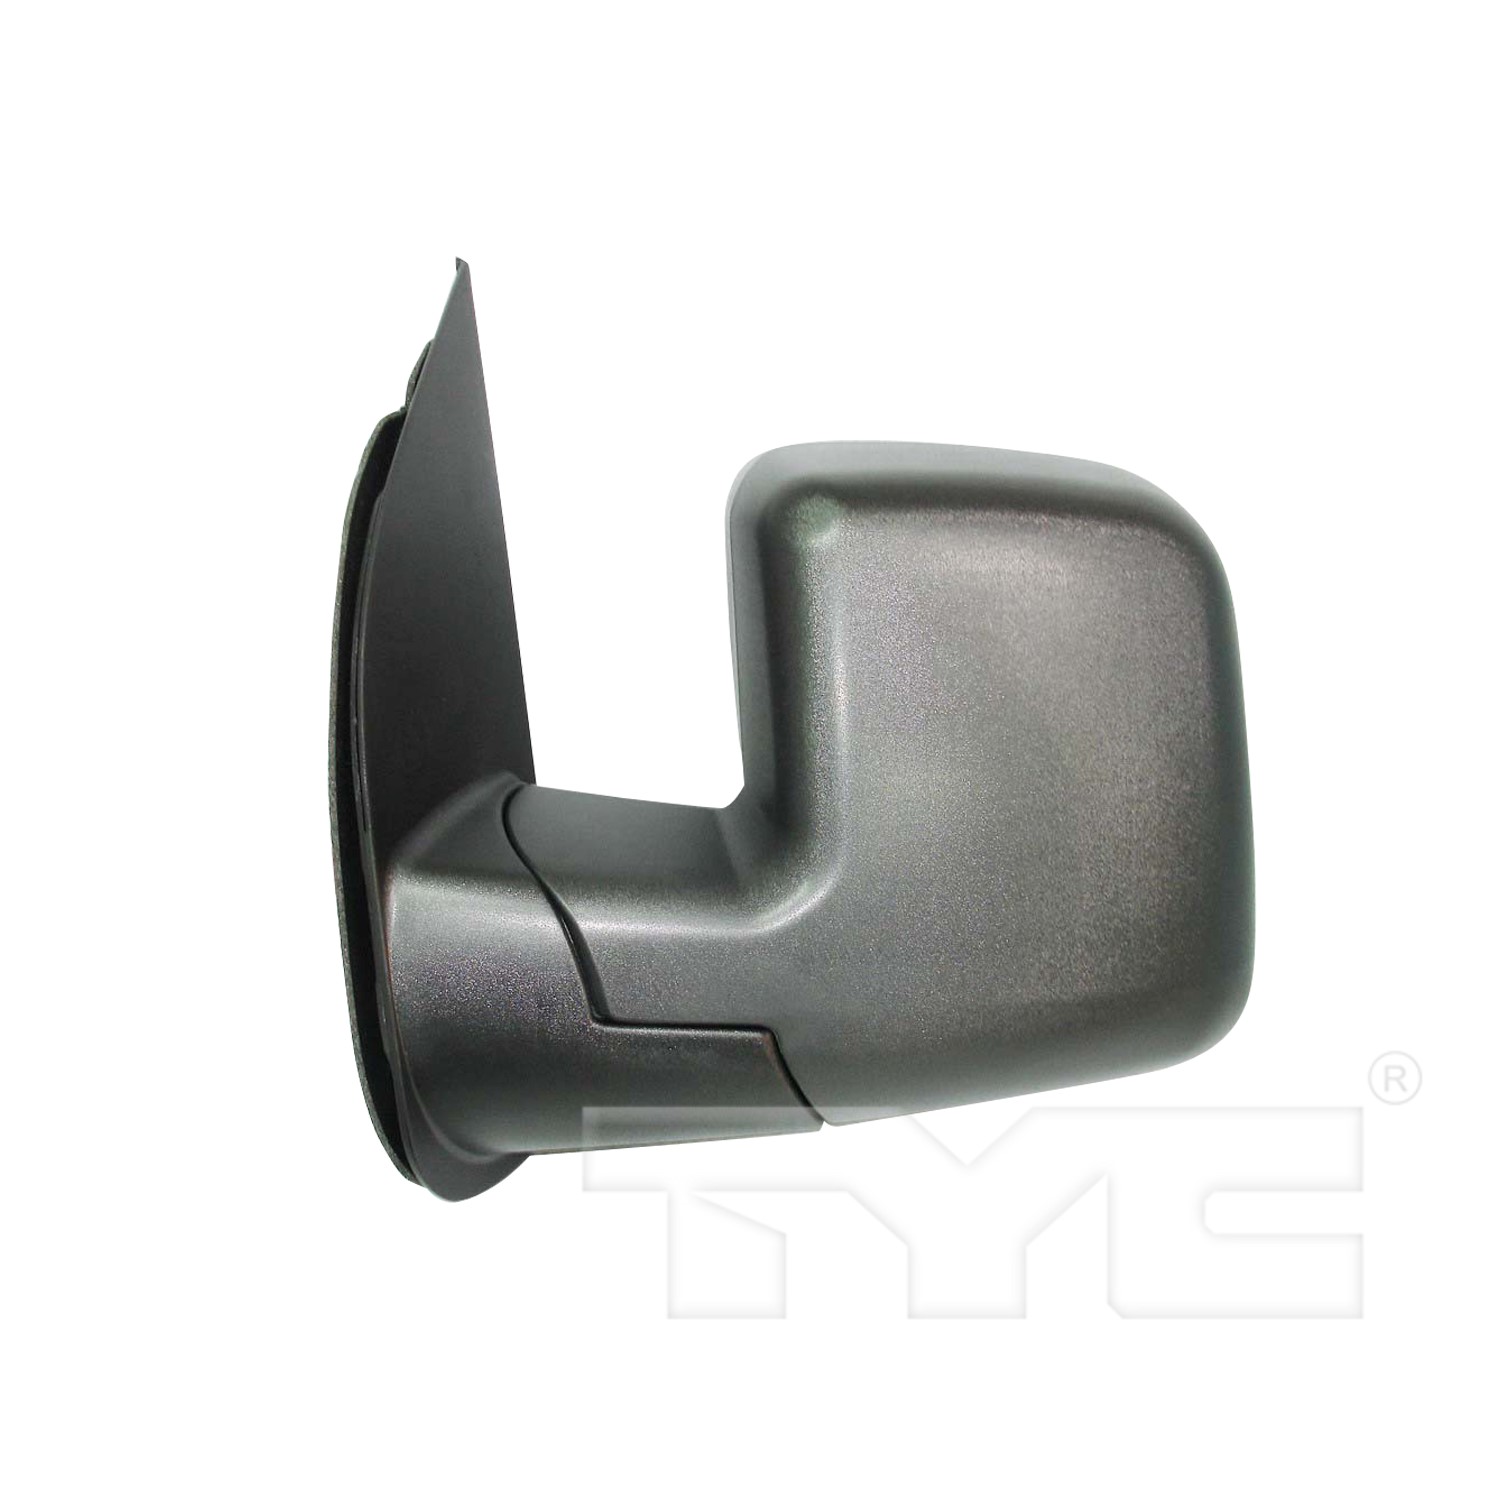 Aftermarket MIRRORS for FORD - E-150, E-150,03-07,LT Mirror outside rear view